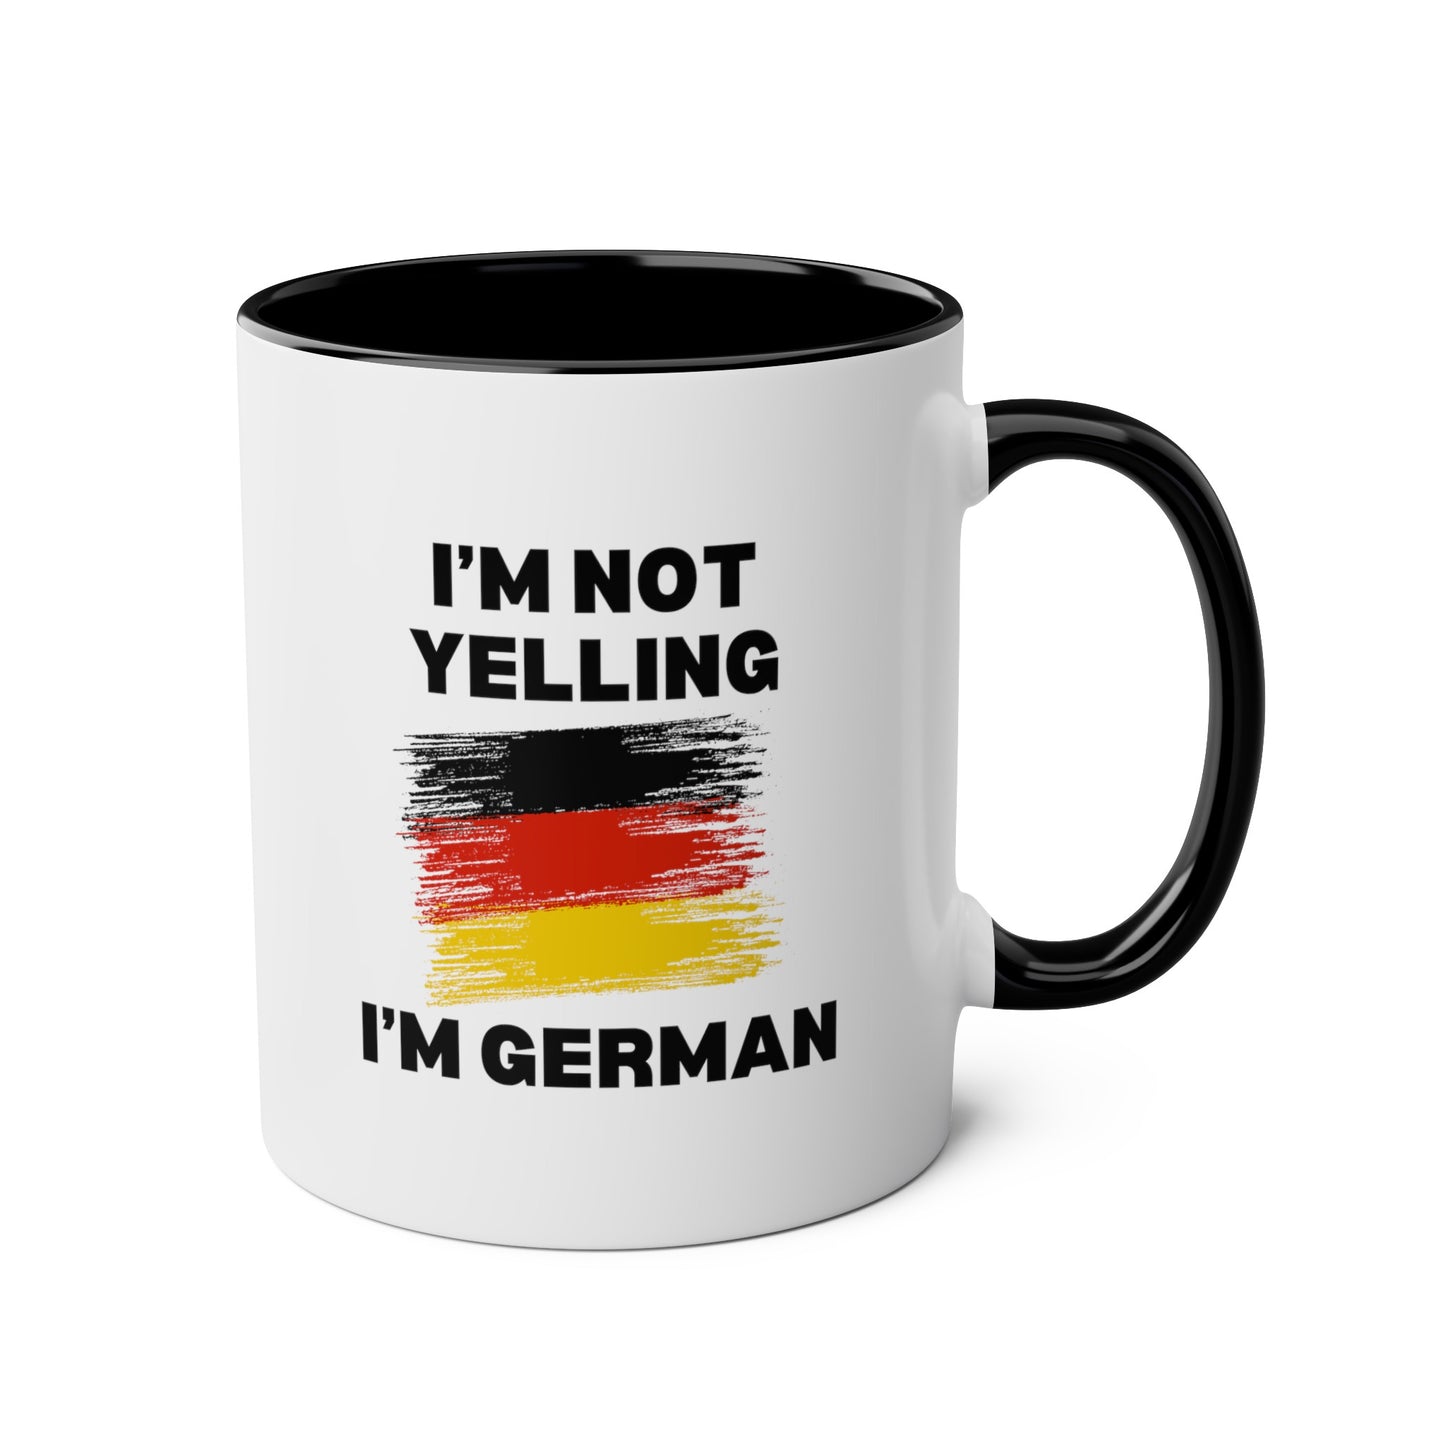 I'm Not Yelling I'm German 11oz white with black accent funny large coffee mug gift for deutsch friend flag germany deutschland birthday waveywares wavey wares wavywares wavy wares